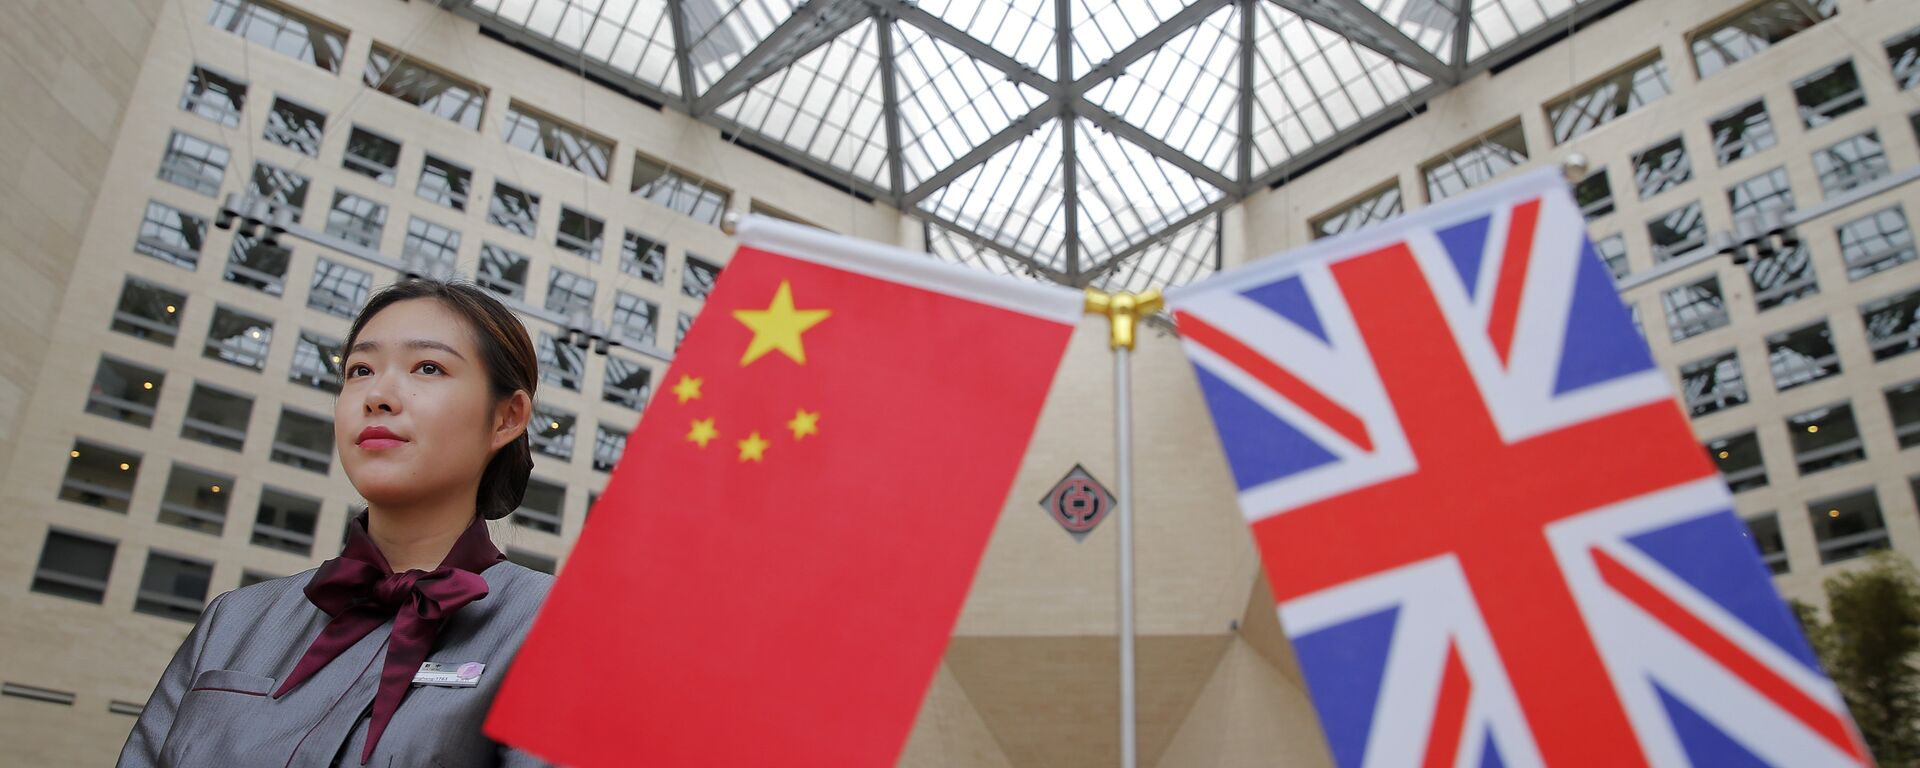 A member of staff stands behind flags as officials arrive for the UK-China High Level Financial Services Roundtable at the Bank of China head office building in Beijing on July 22, 2016 - Sputnik International, 1920, 03.12.2021